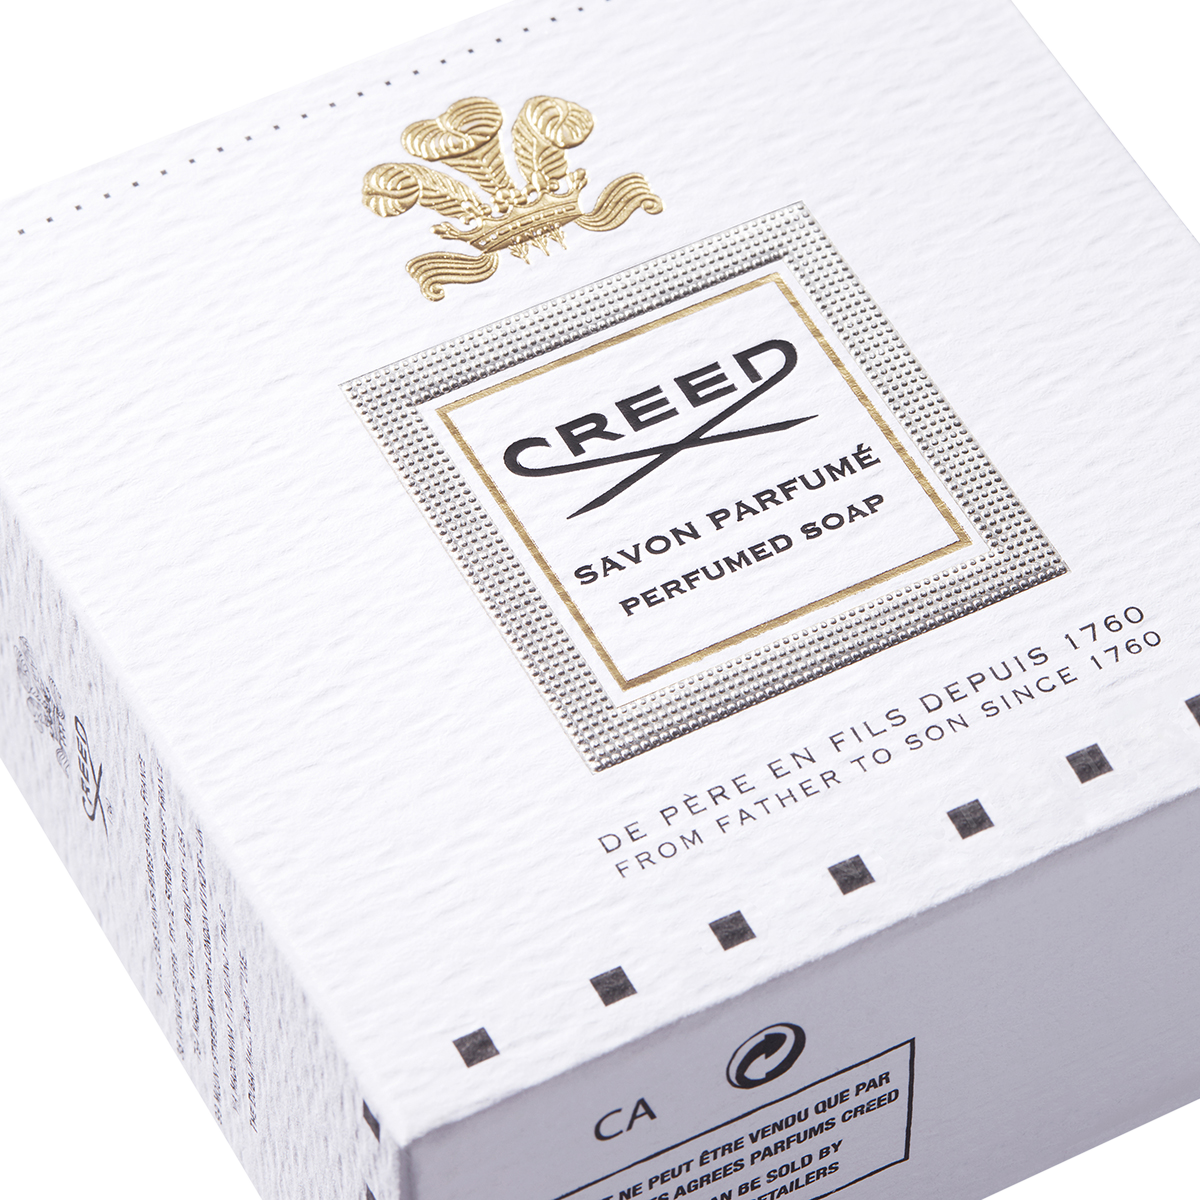 Creed - Aventus for Her Parfum Soap